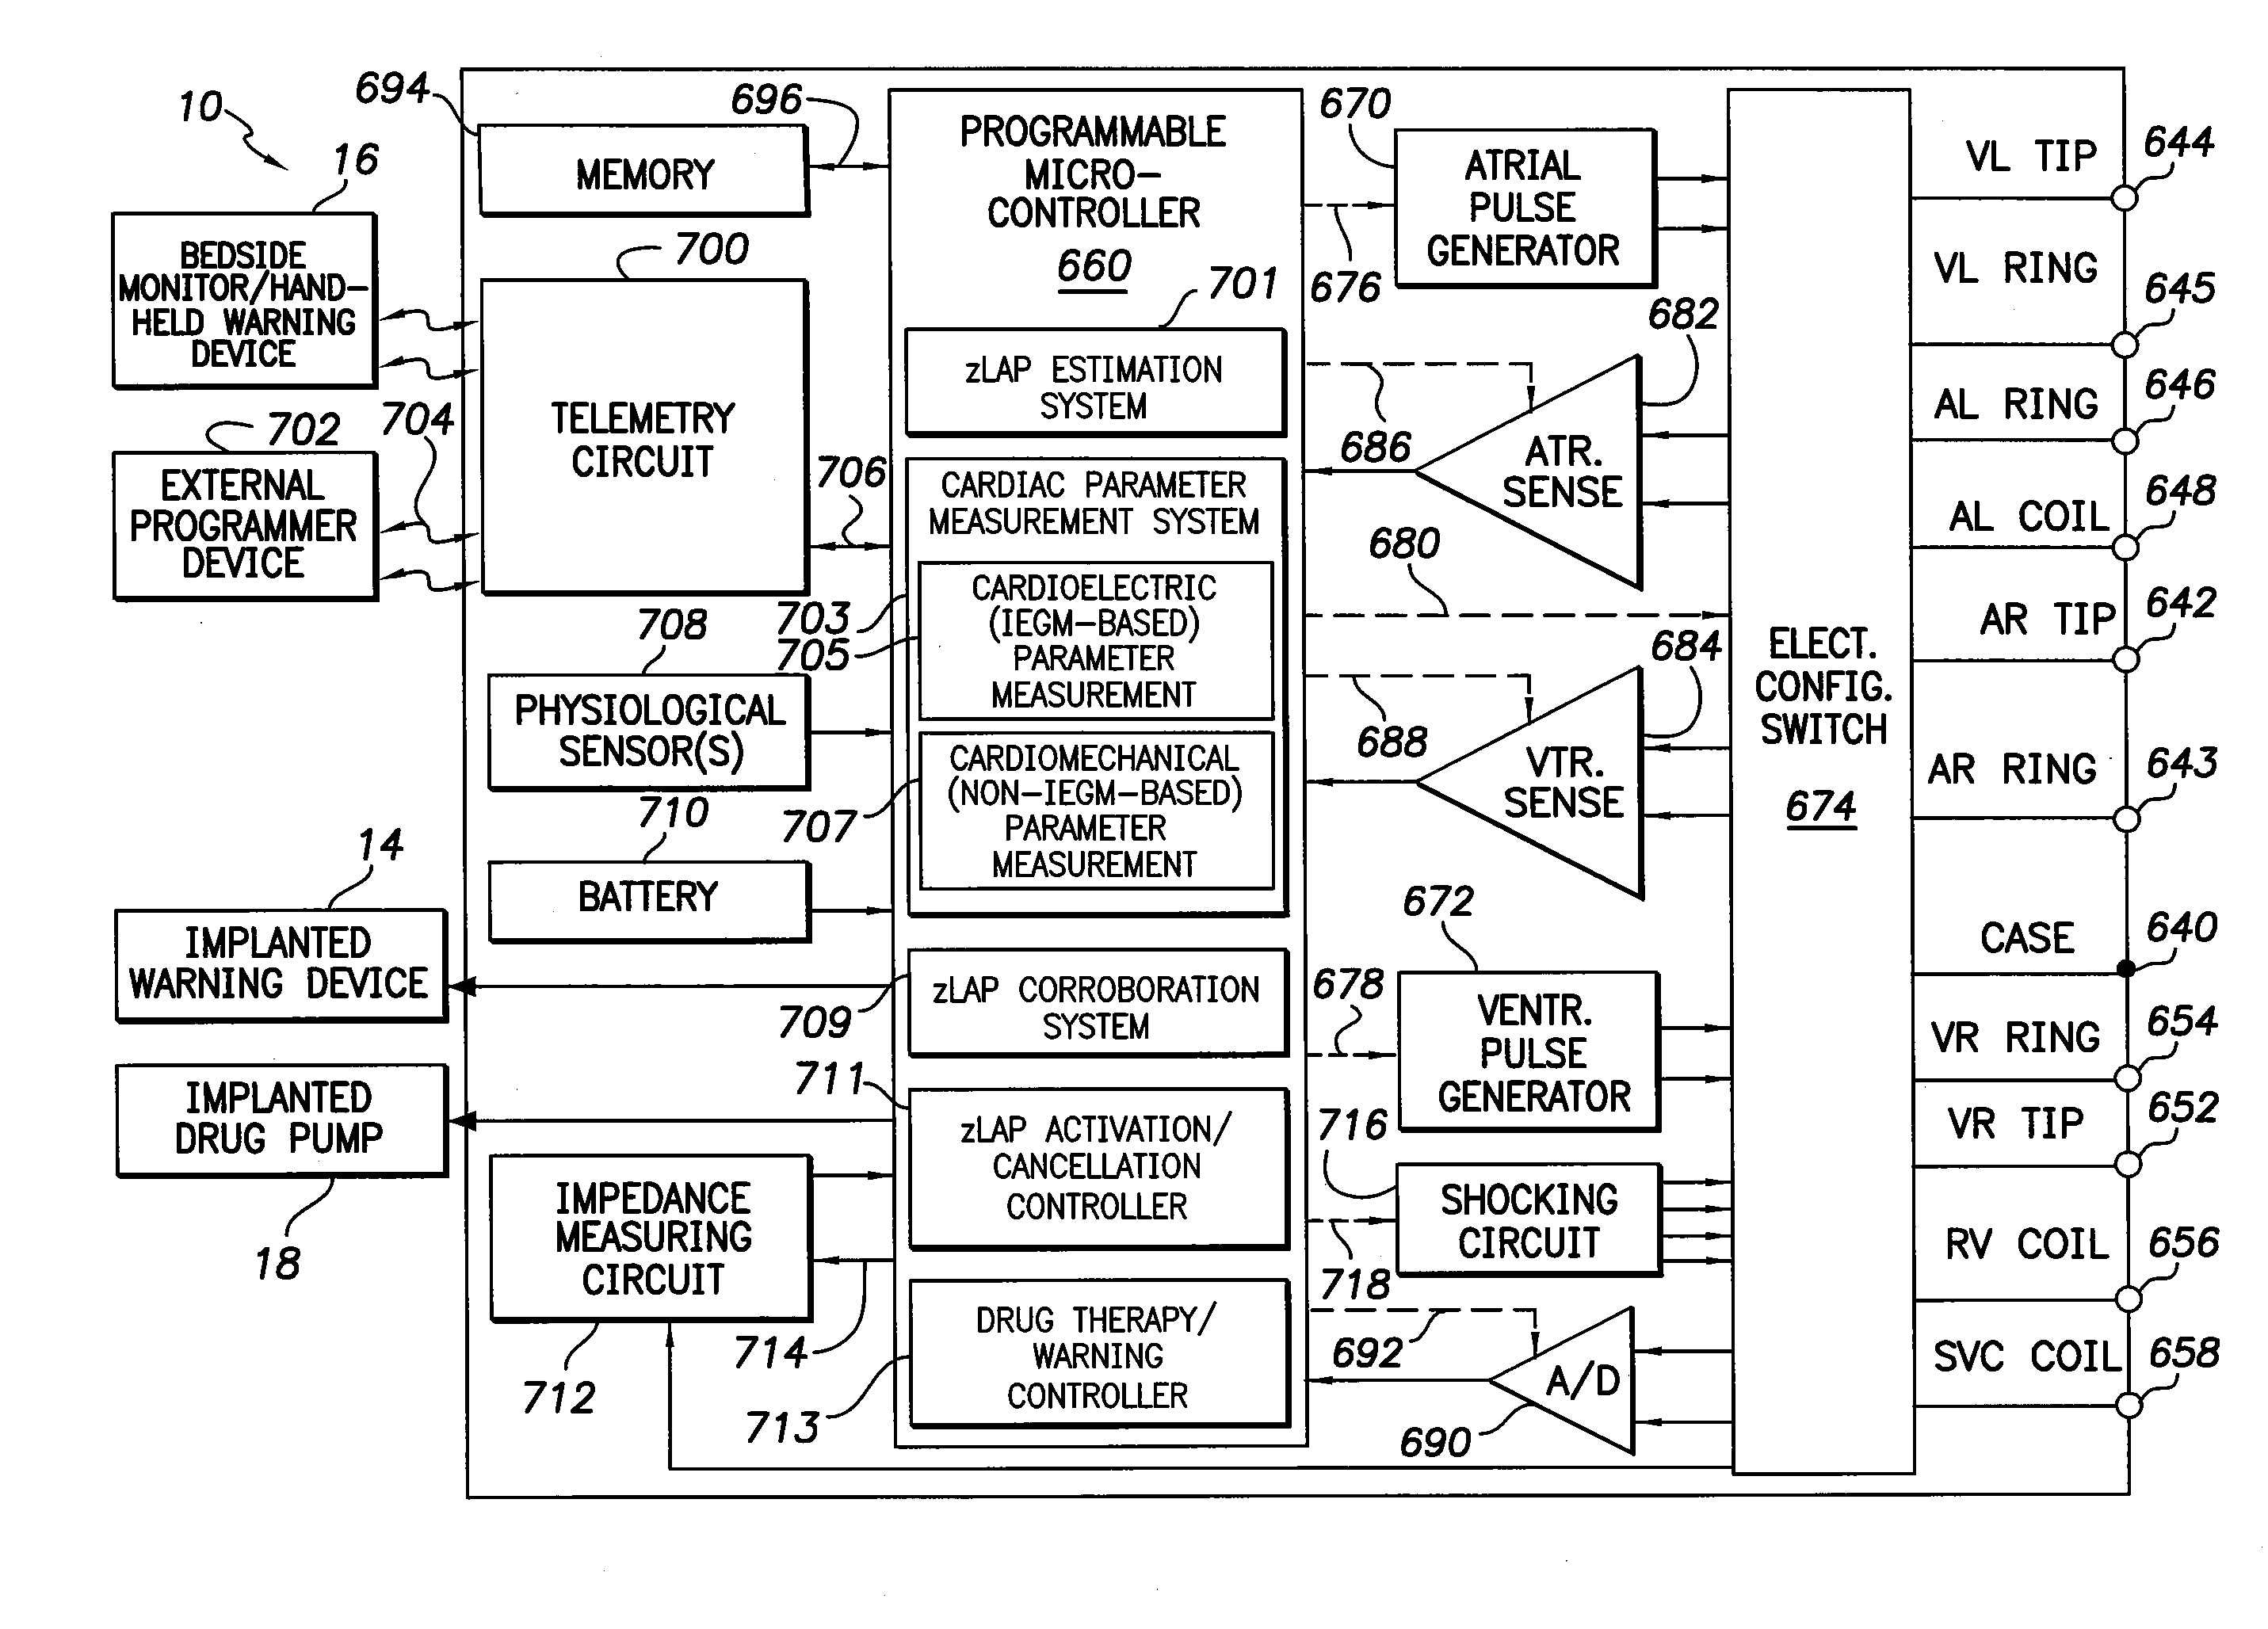 Systems and methods for corroborating impedance-based left atrial pressure (LAP) estimates for use by an implantable medical device